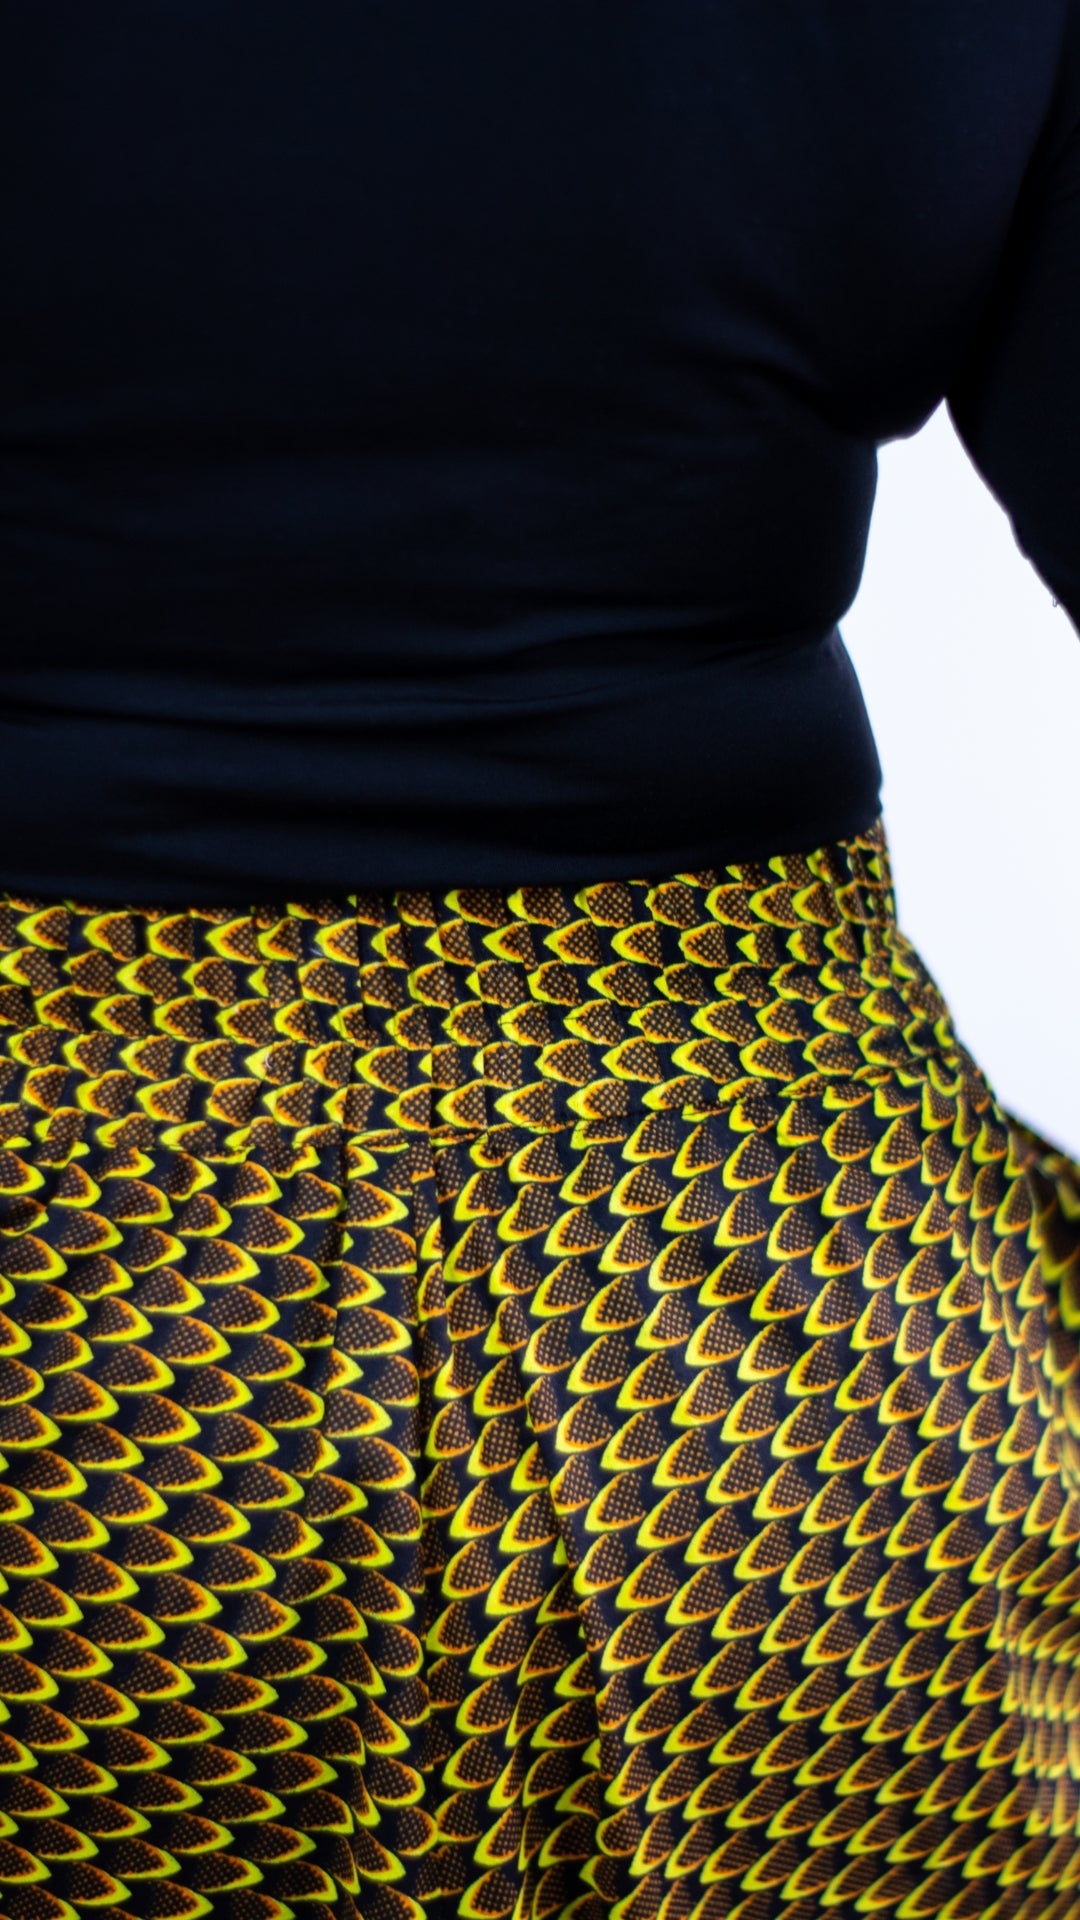 A  close-up highlighting the elasticised waist of a yellow African print skirt. This image provides a focused view of the elastic waistband, emphasizing the comfort and flexibility of the garment